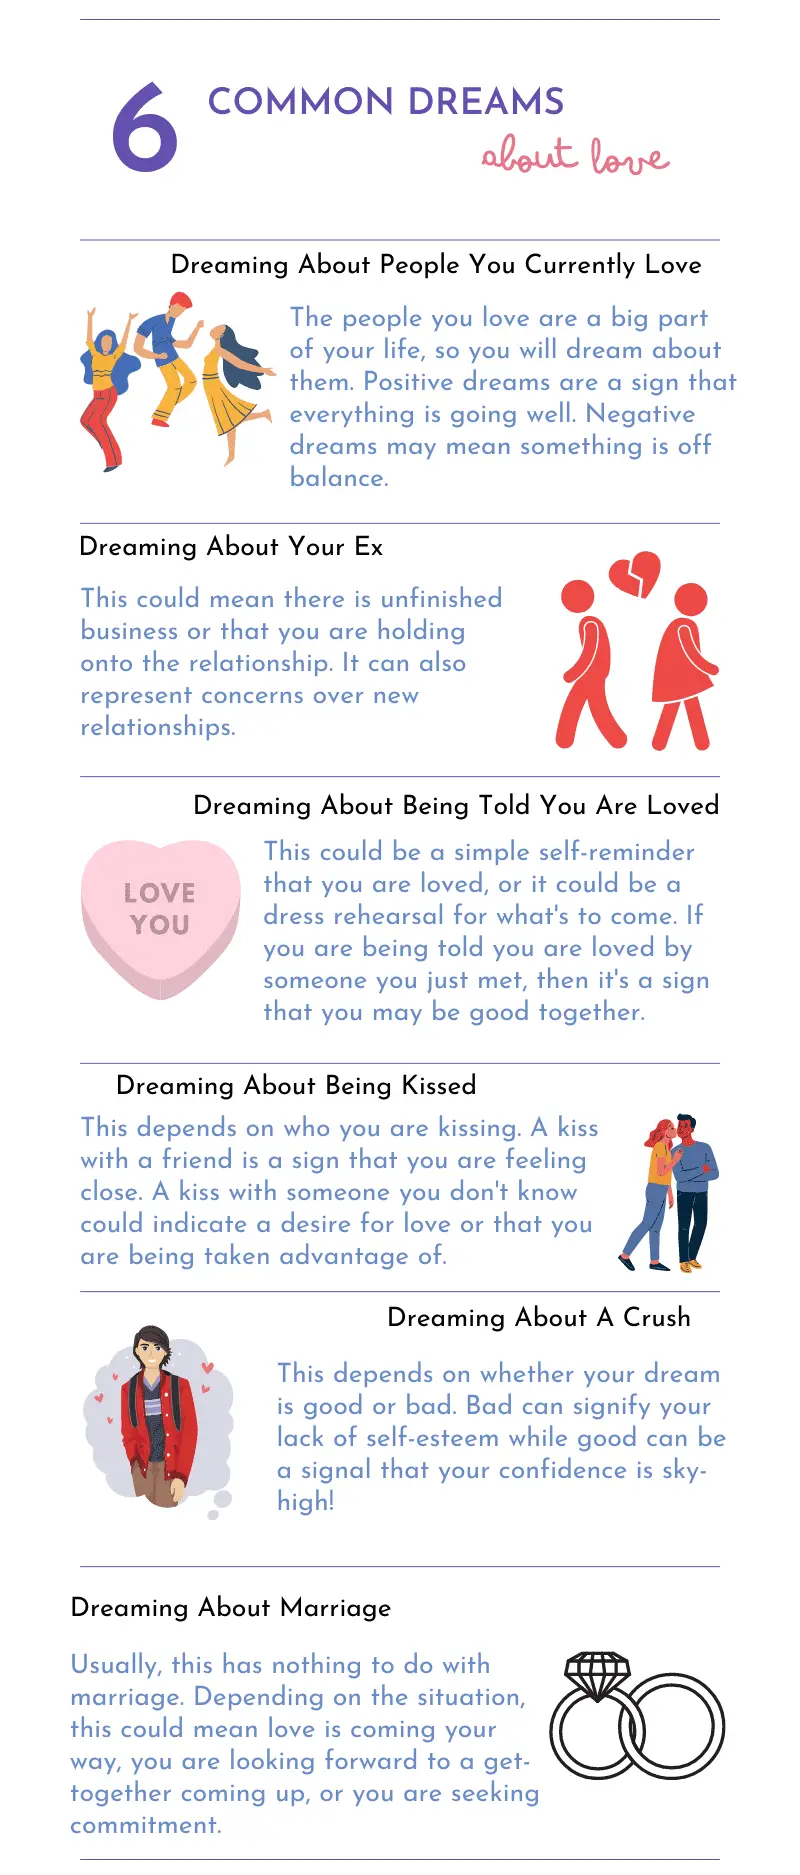 How To Make The Most Of Dreams Of Falling In Love